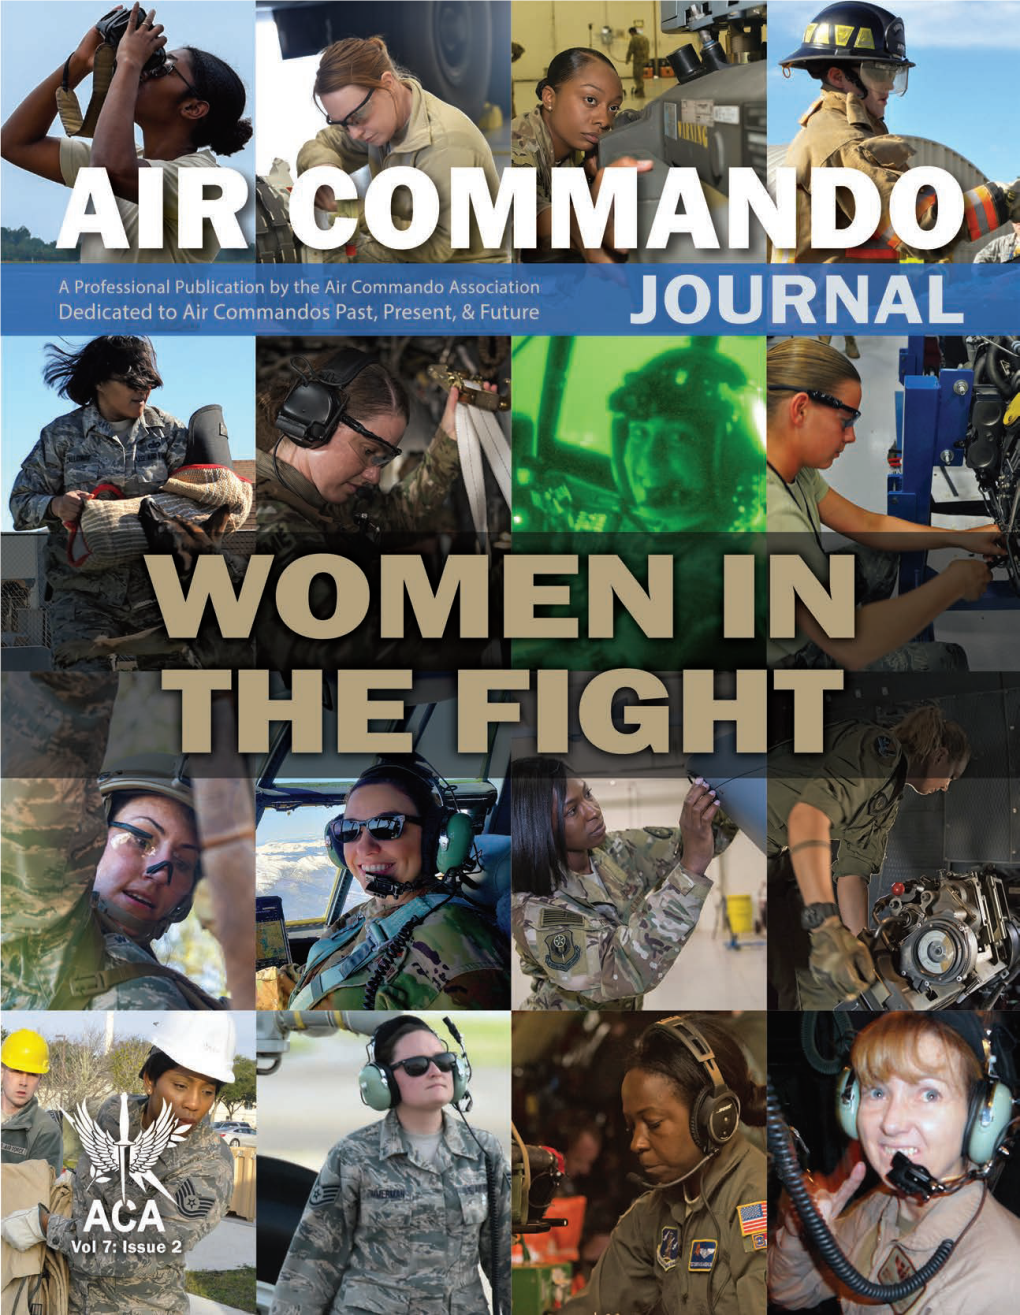 Air Commando Journal May Be Reproduced Southeastern Landscaping Provided the Source Is Credited